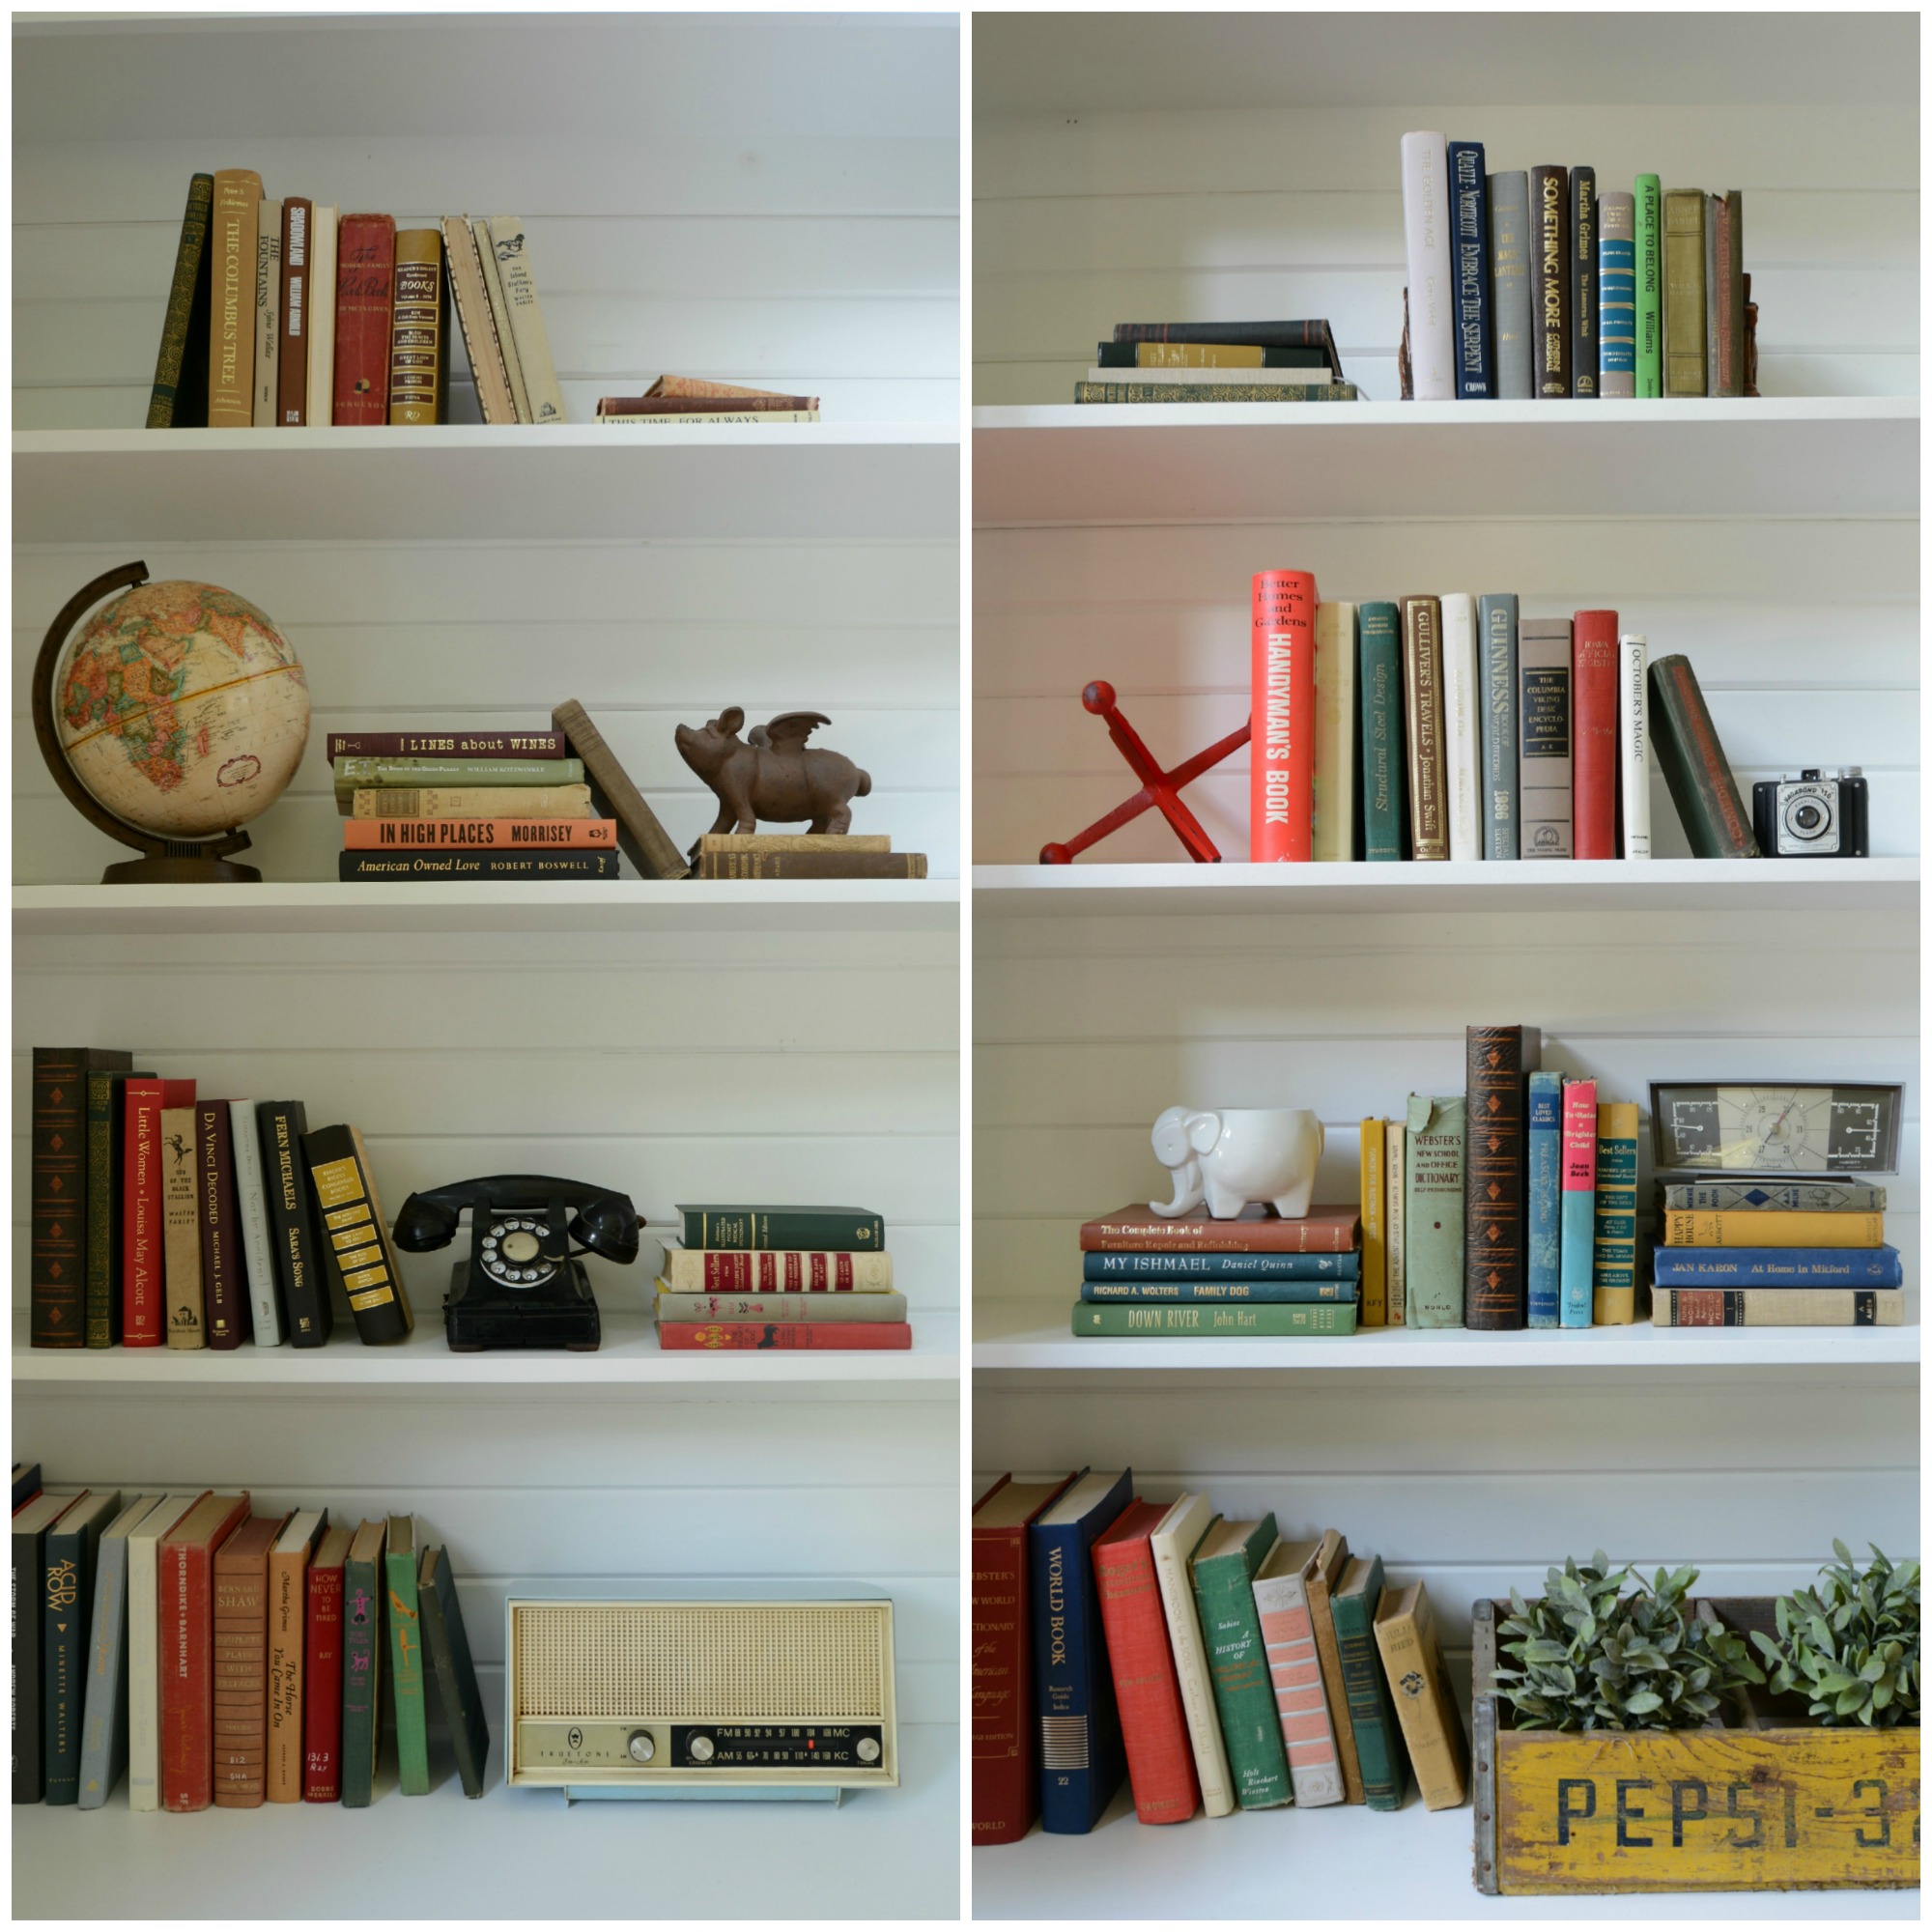 How To Decorate Bookshelves Decor And The Dog